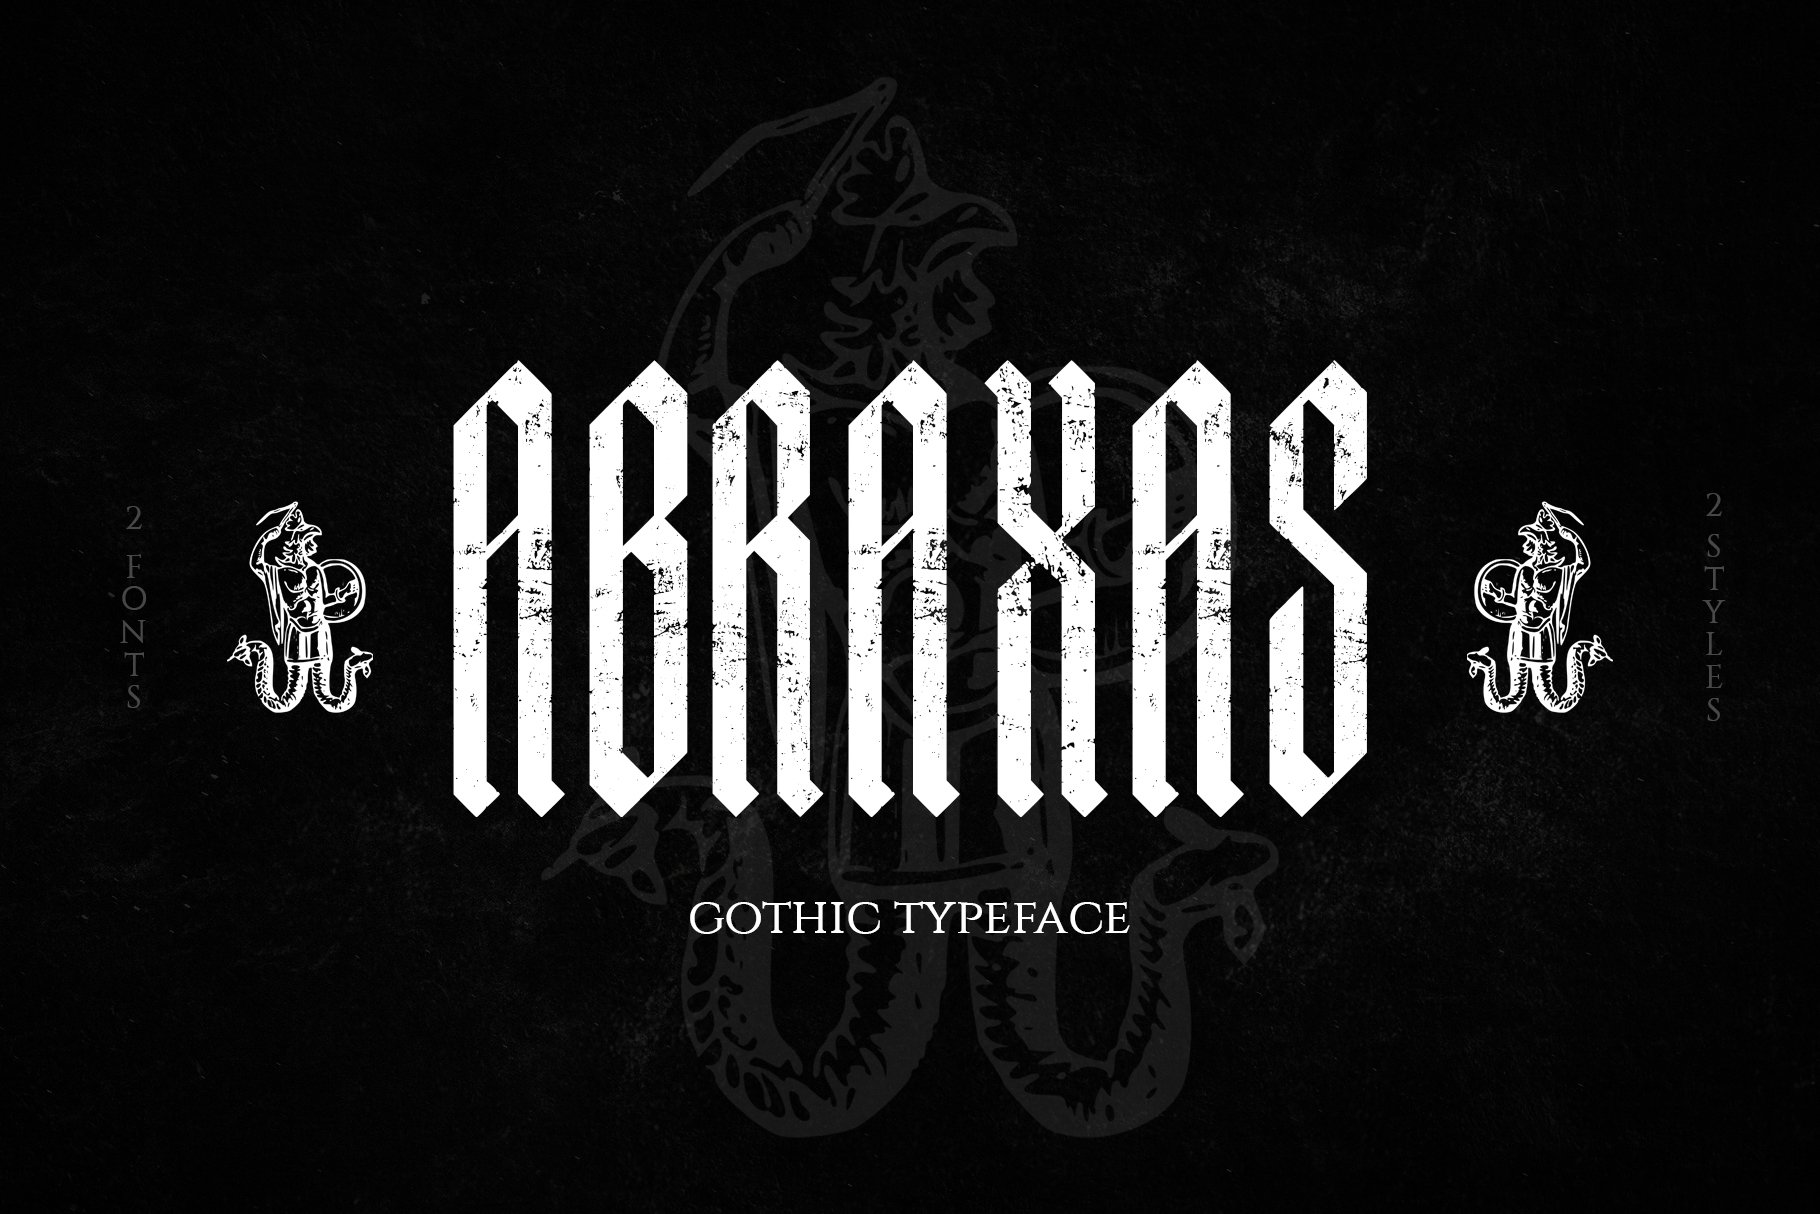 ABRAXAS | Gothic Typeface cover image.